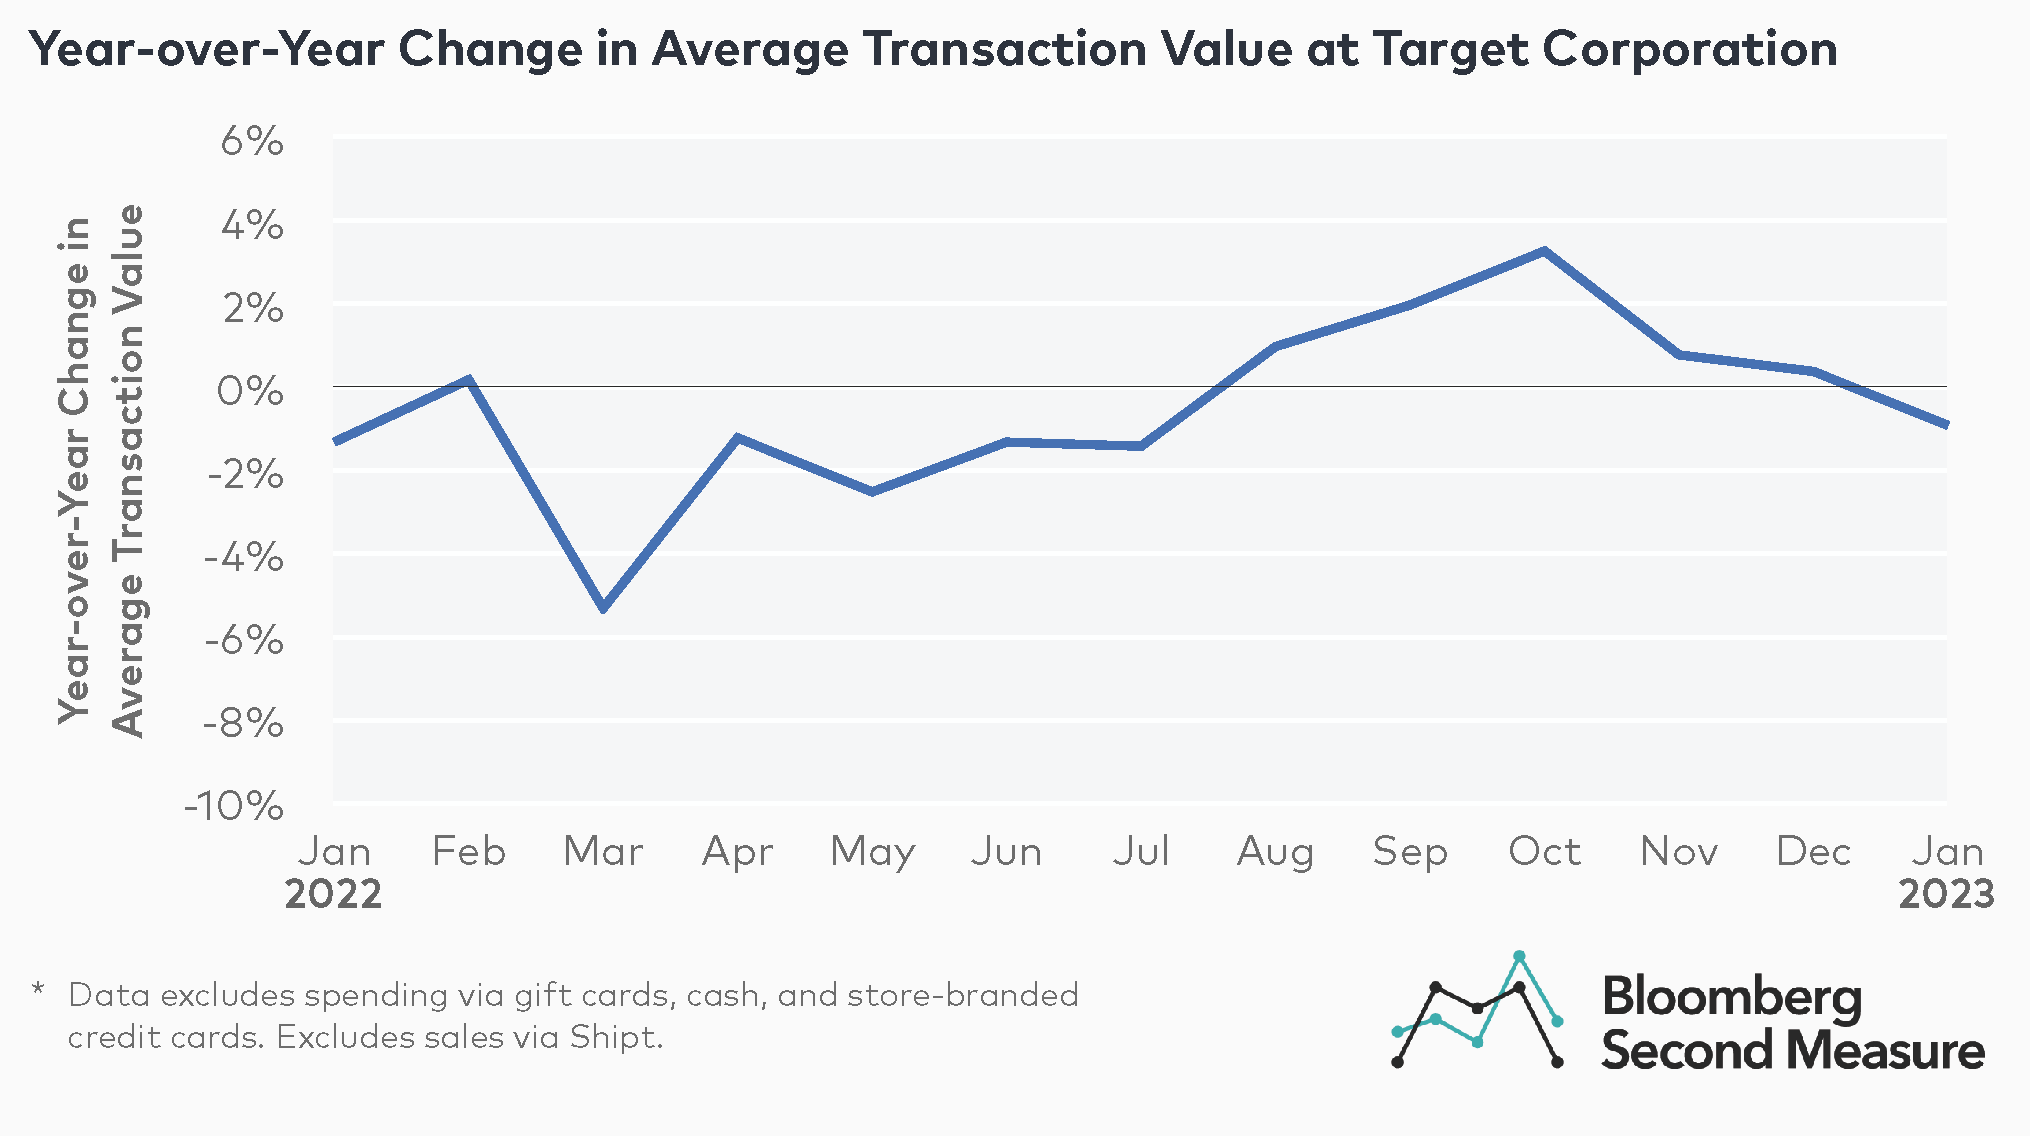 Ahead of Target's earnings call, transaction data projected a Q4